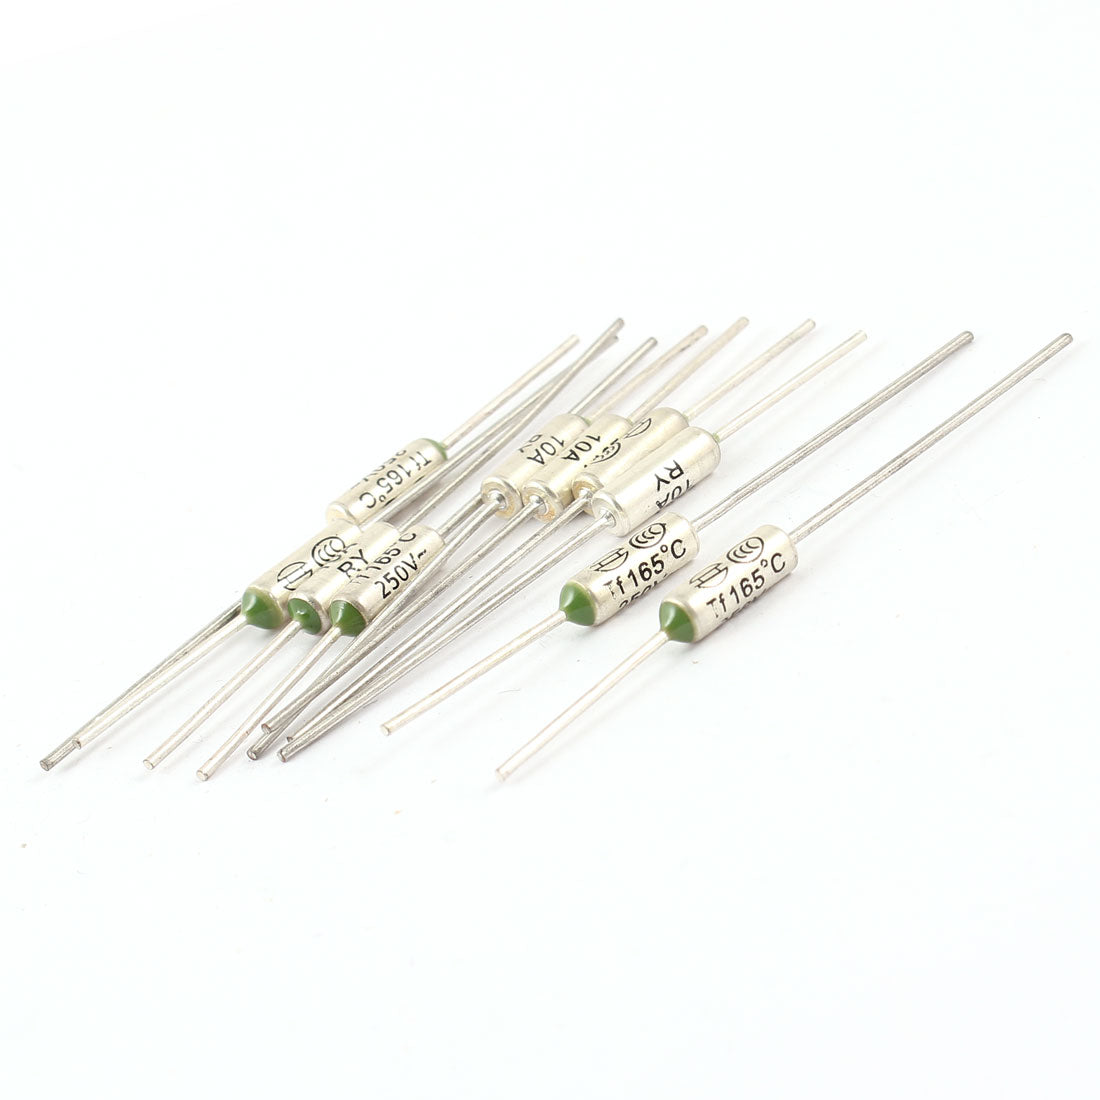 uxcell Uxcell 10Pcs Microtemp Circuit Protection Aluminum Thermal Fuse 165C Degree 250V 10A